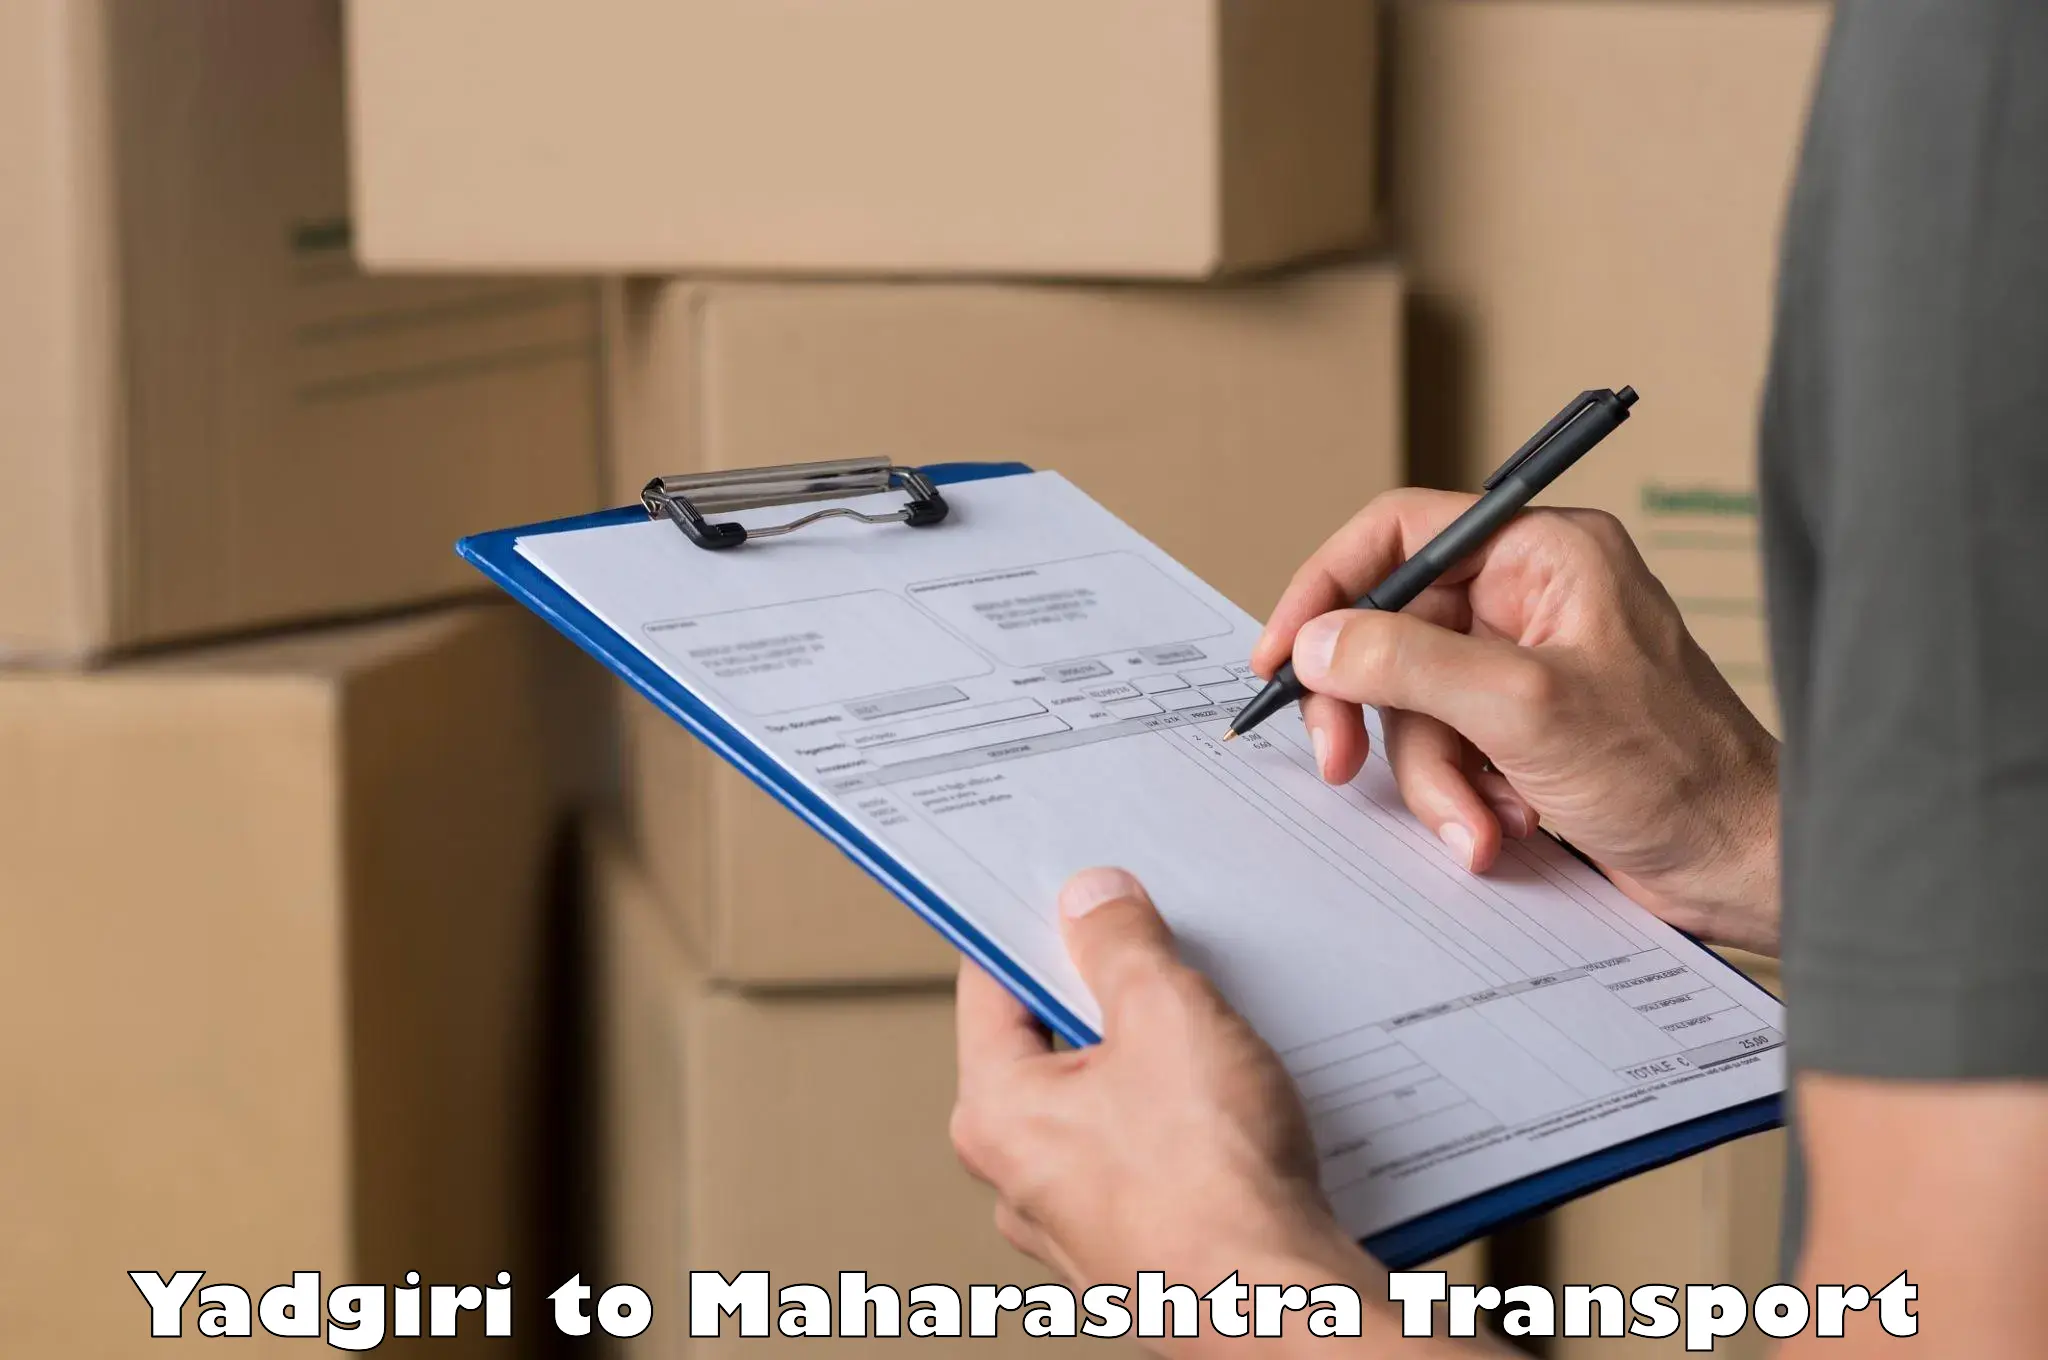 Air freight transport services Yadgiri to Osmanabad